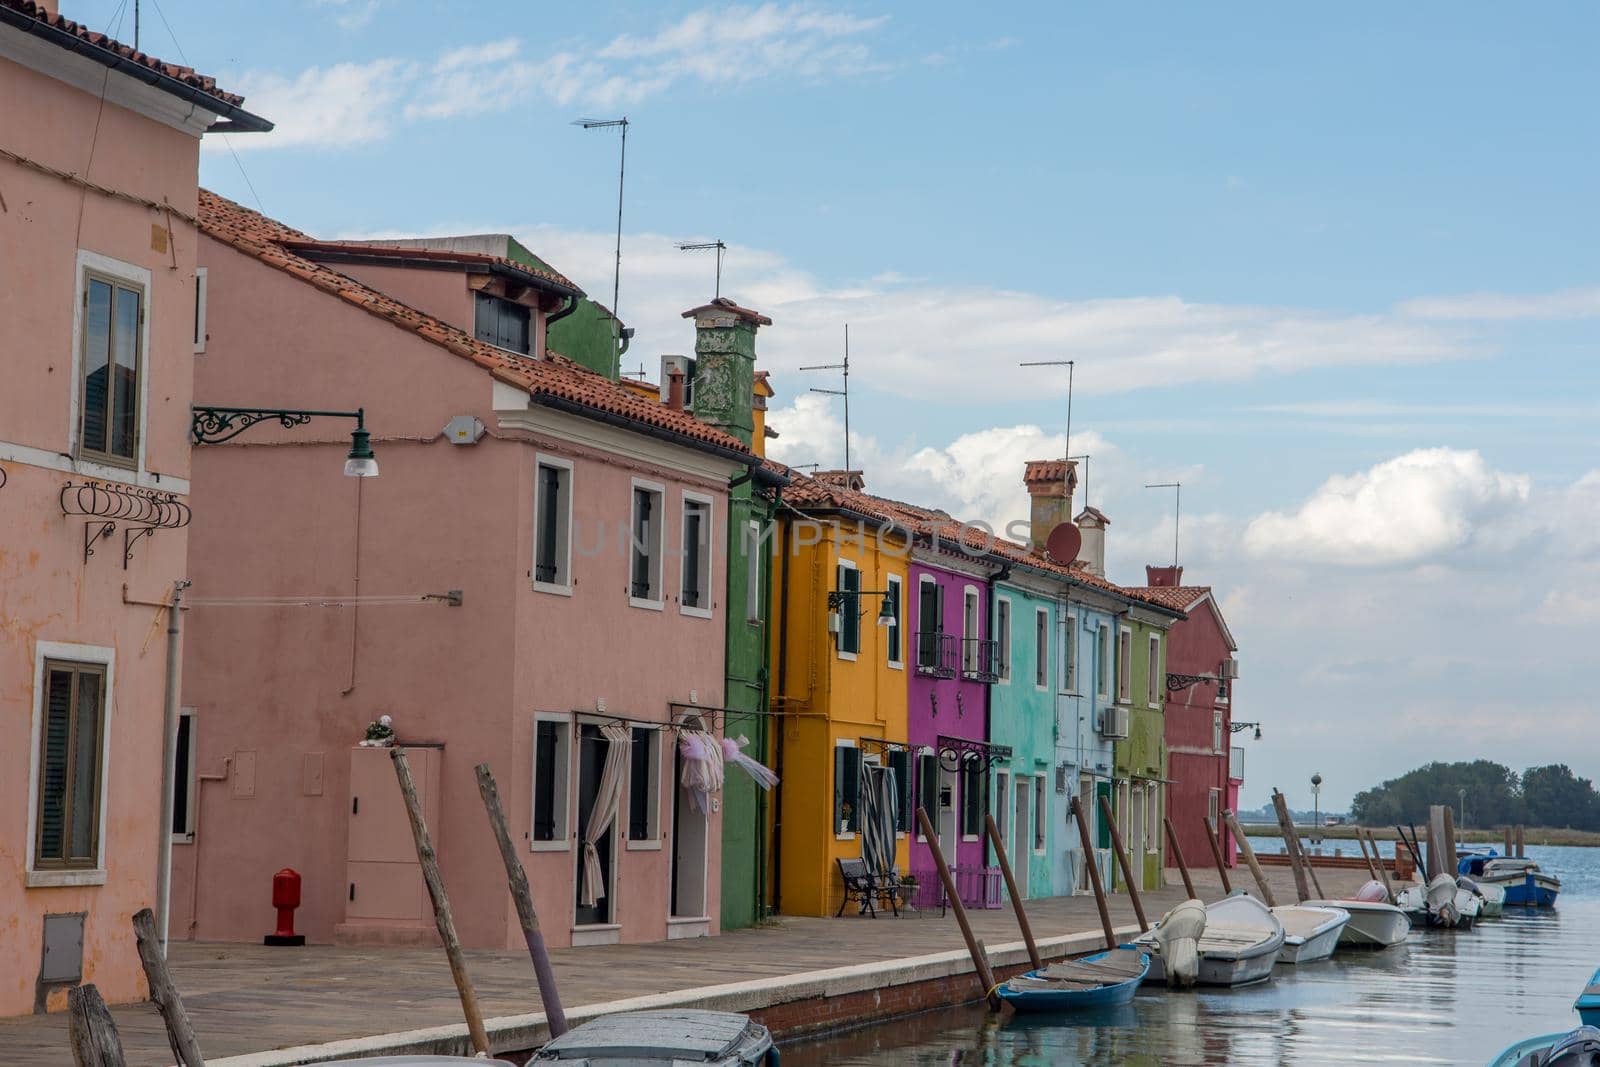 discovery of the city of Venice, Burano and its small canals and romantic alleys by shovag